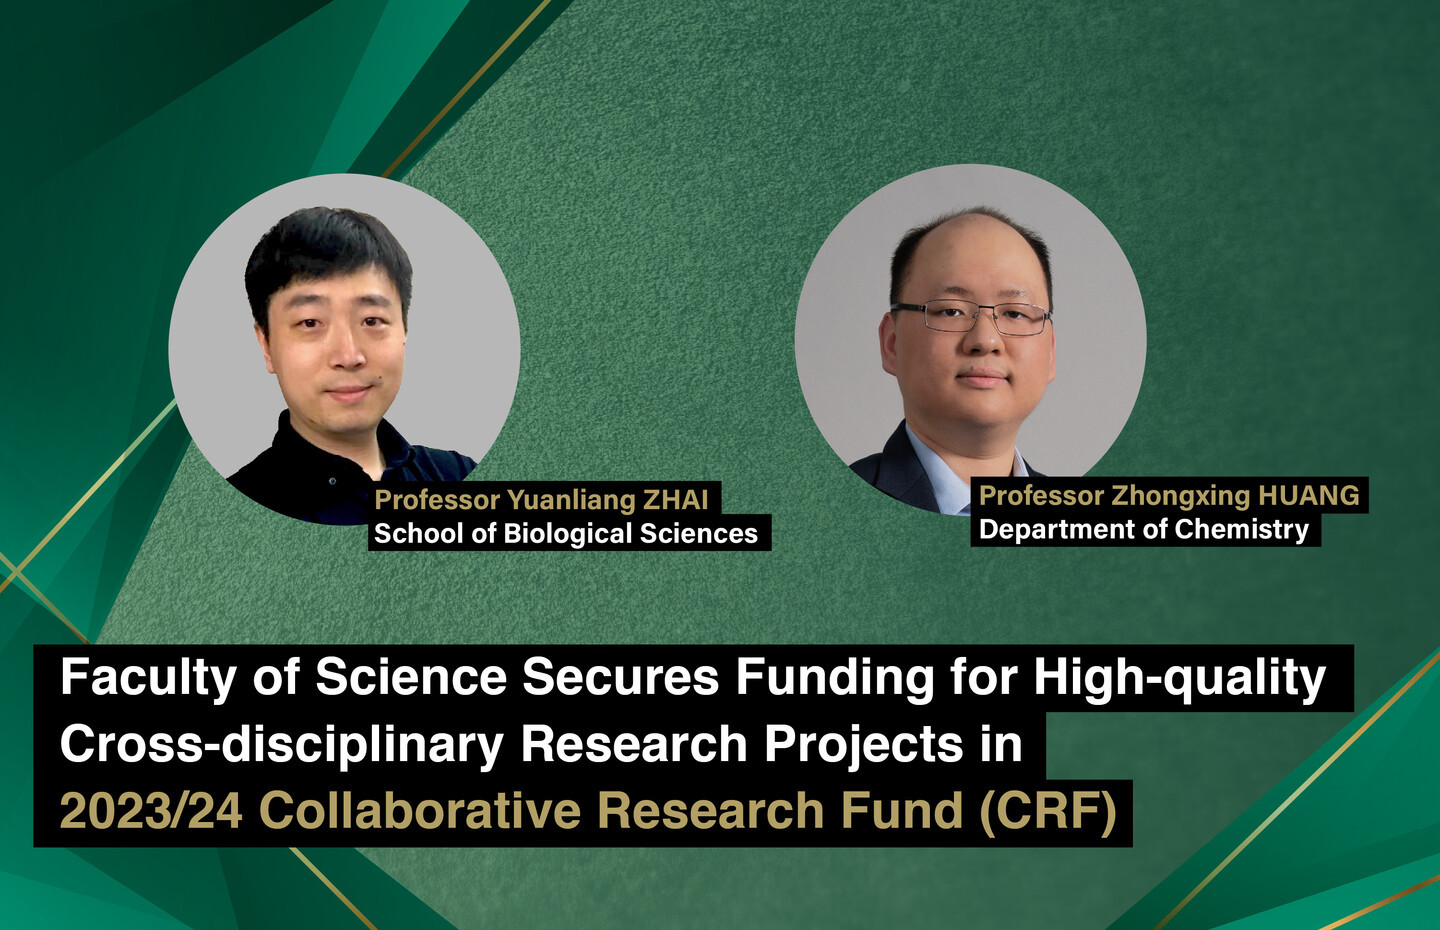 Faculty of Science Secures Funding for High-quality Cross-disciplinary Research Projects in 2023/24 Collaborative Research Fund (CRF)